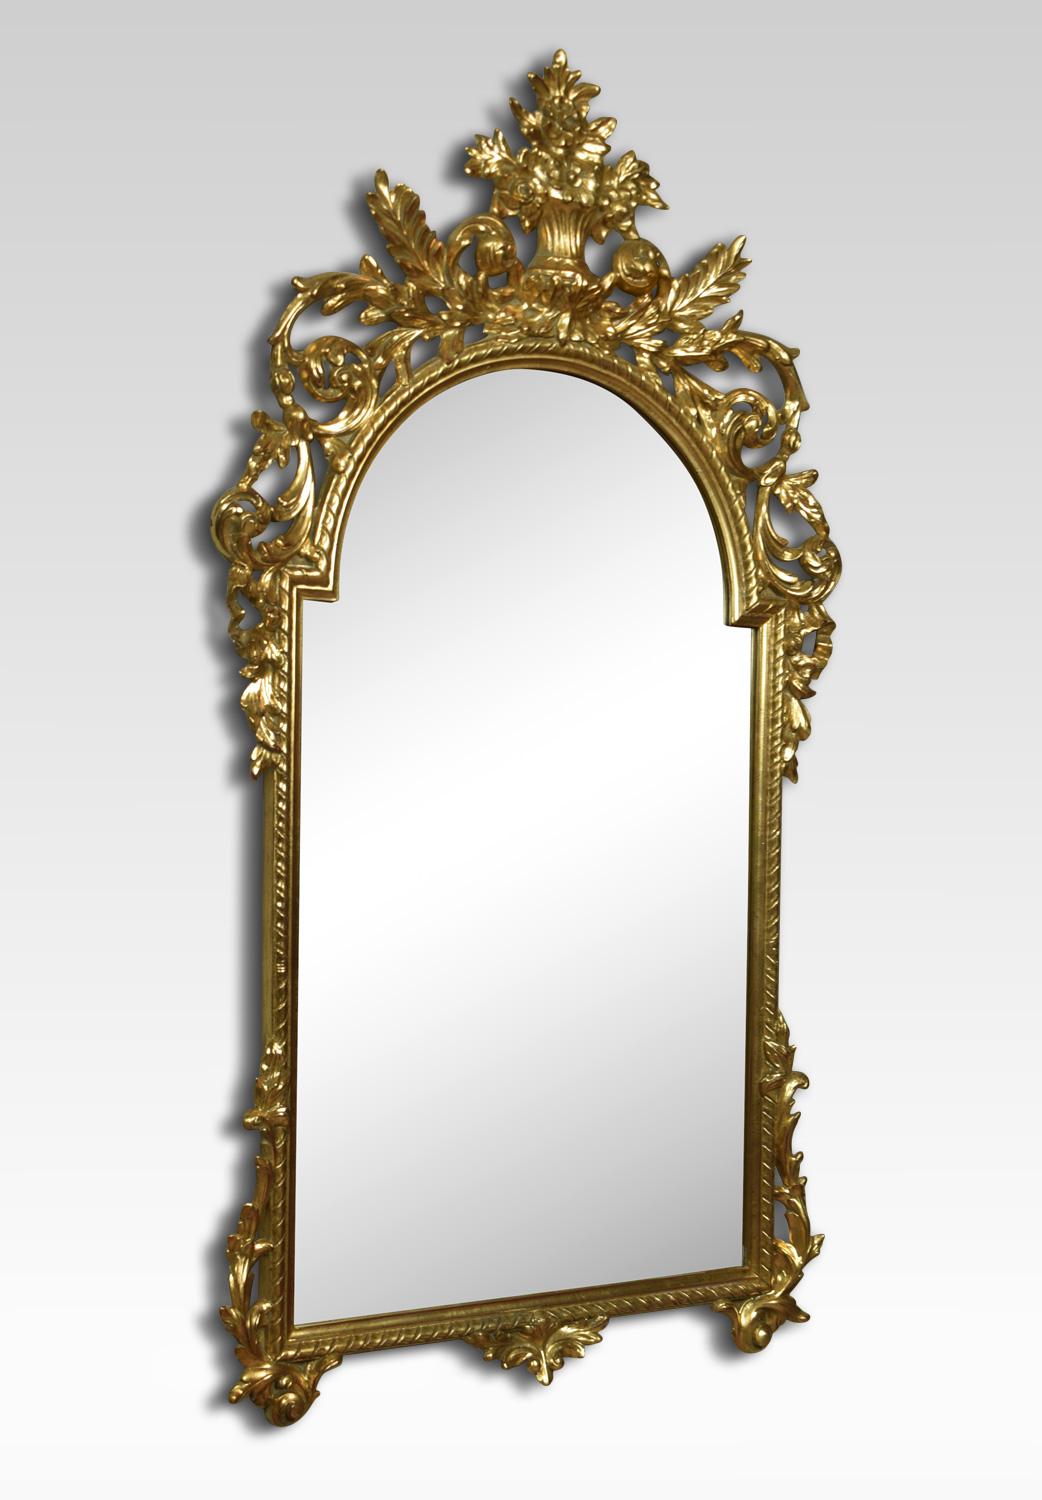 Baroque style giltwood wall mirror, with floral basket crest over pierced and carved frame surrounding original mirror plate.
Dimensions:
Height 55.5 inches
Width 30 inches
Depth 2.5 inches.